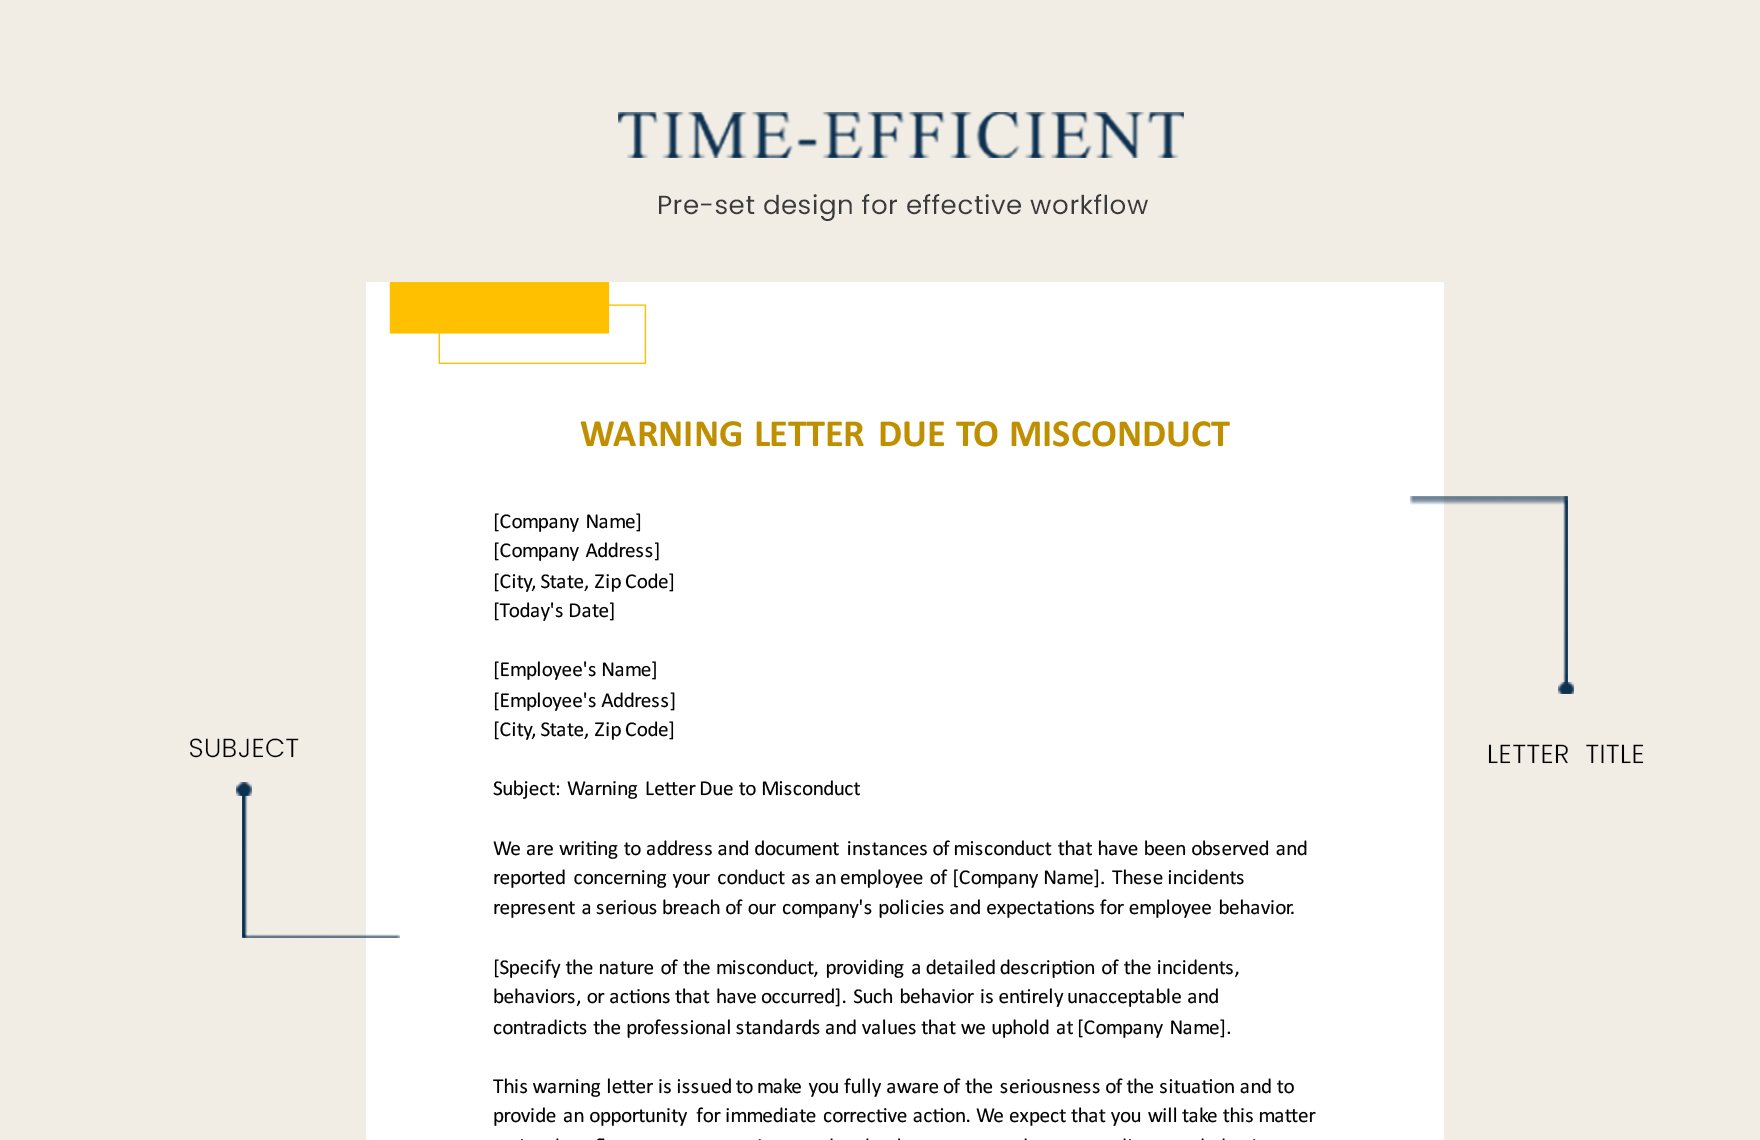 Warning Letter Due To Misconduct